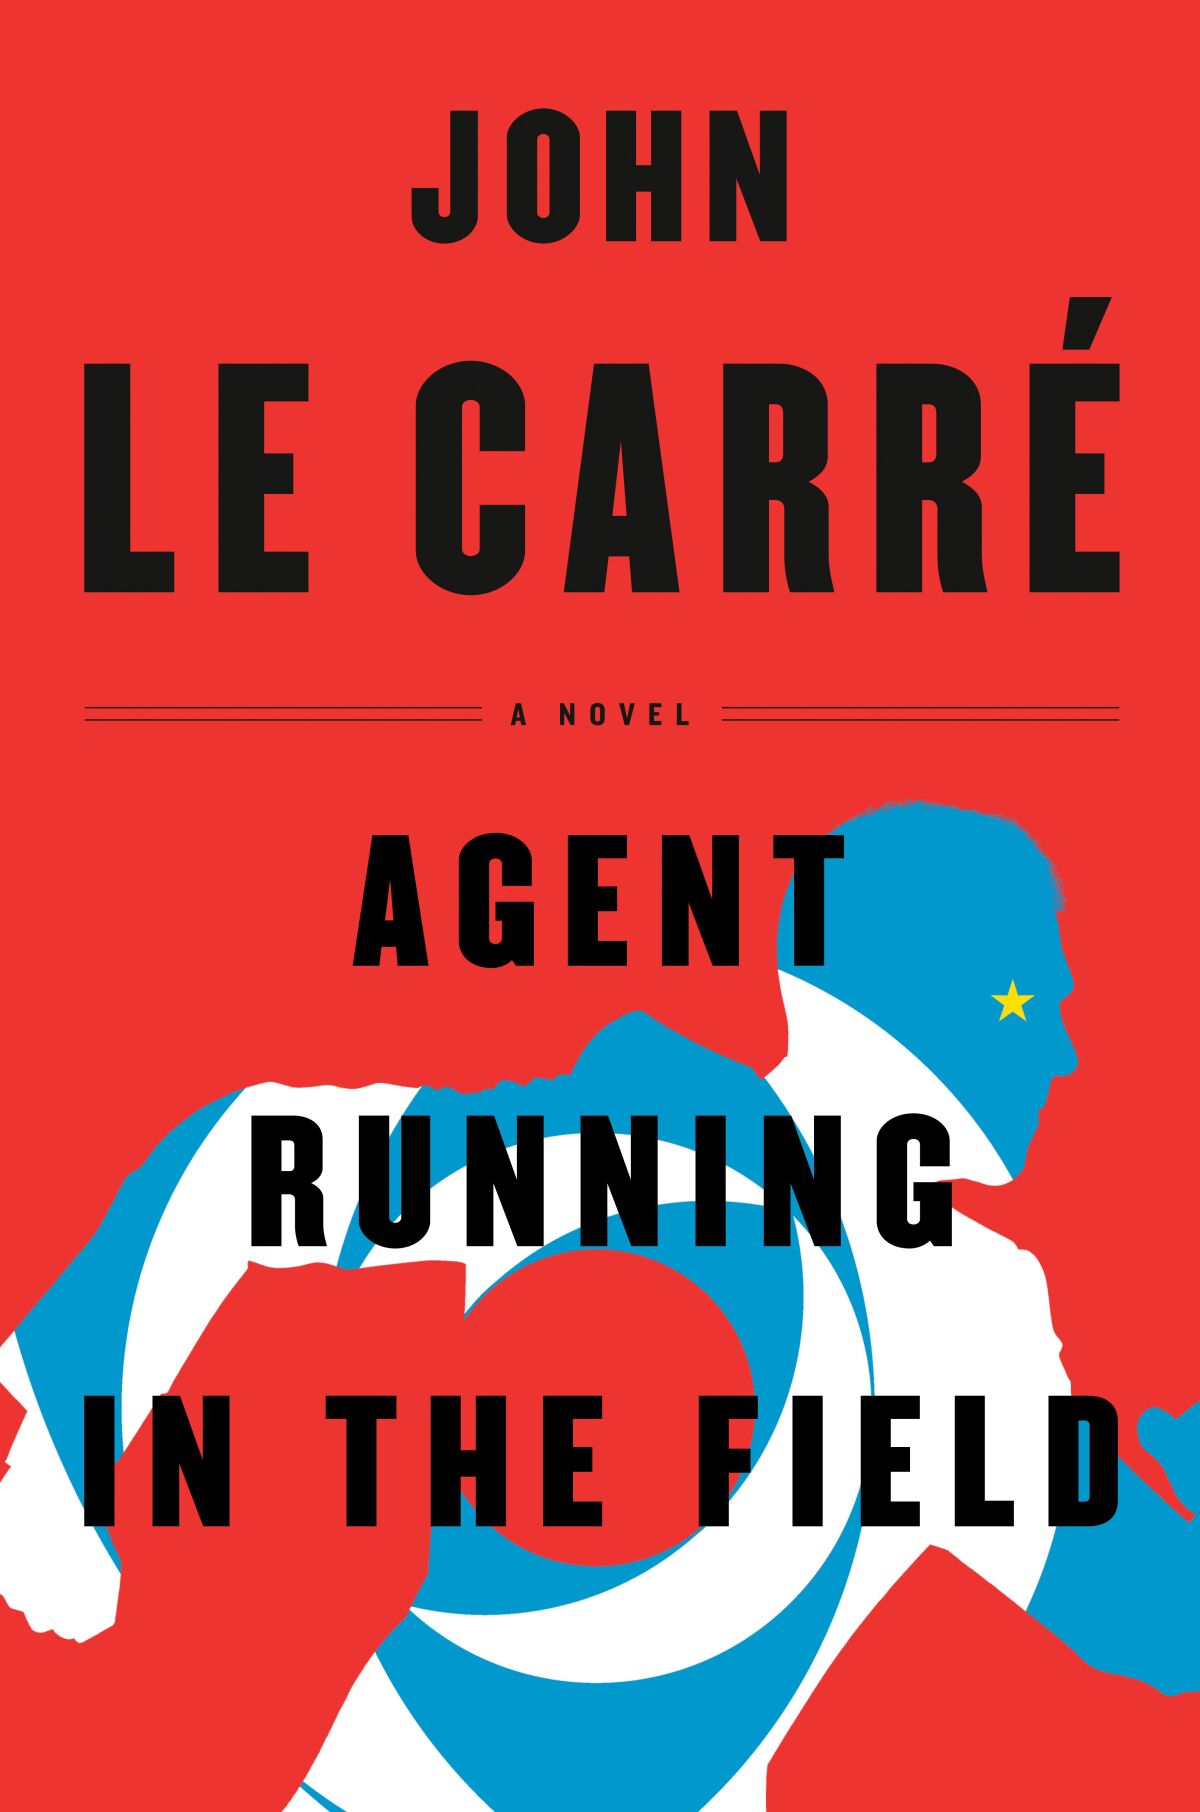 "Agent Running in the Field" by John le Carré.